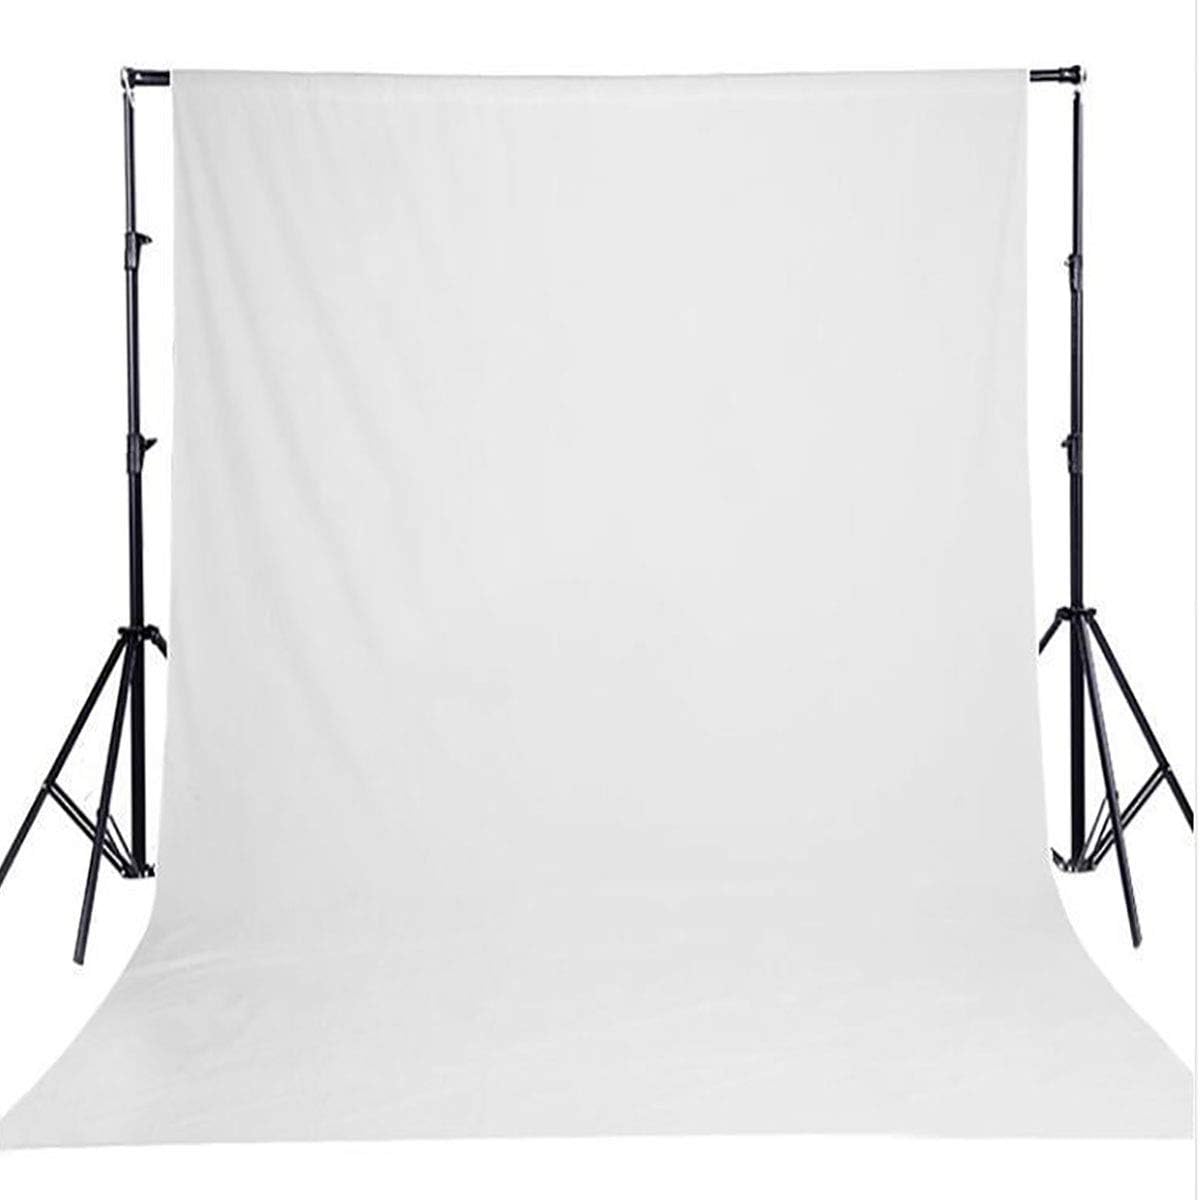 Tips for Shooting with White Photography Backdrops